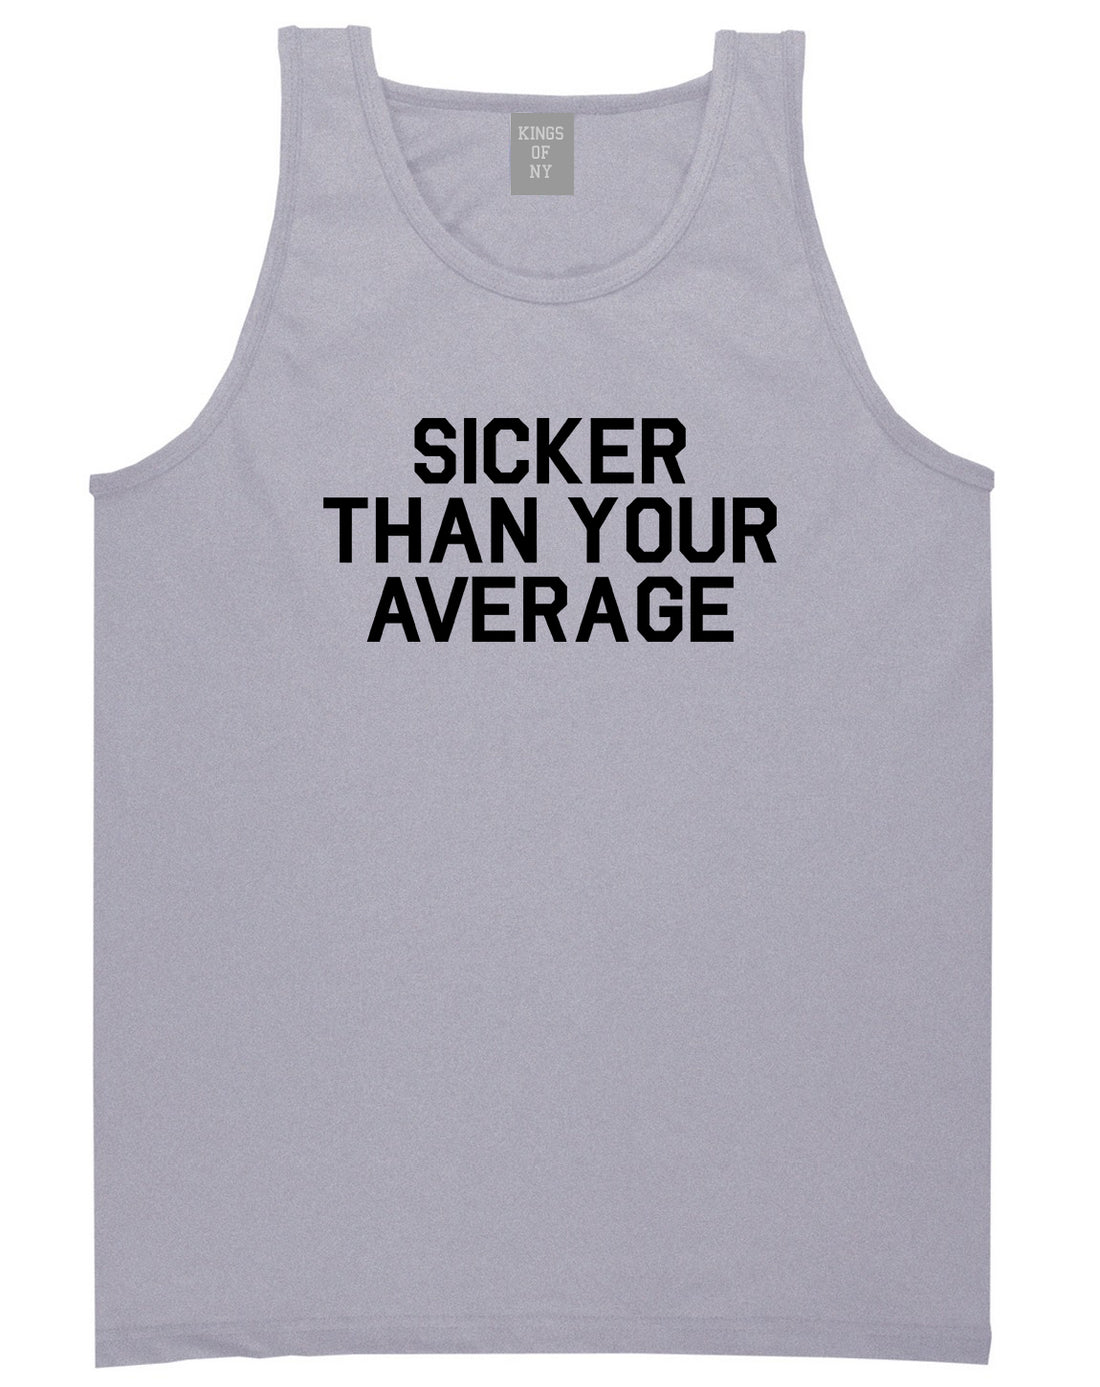 Sicker Than Your Average Tank Top Shirt in Grey